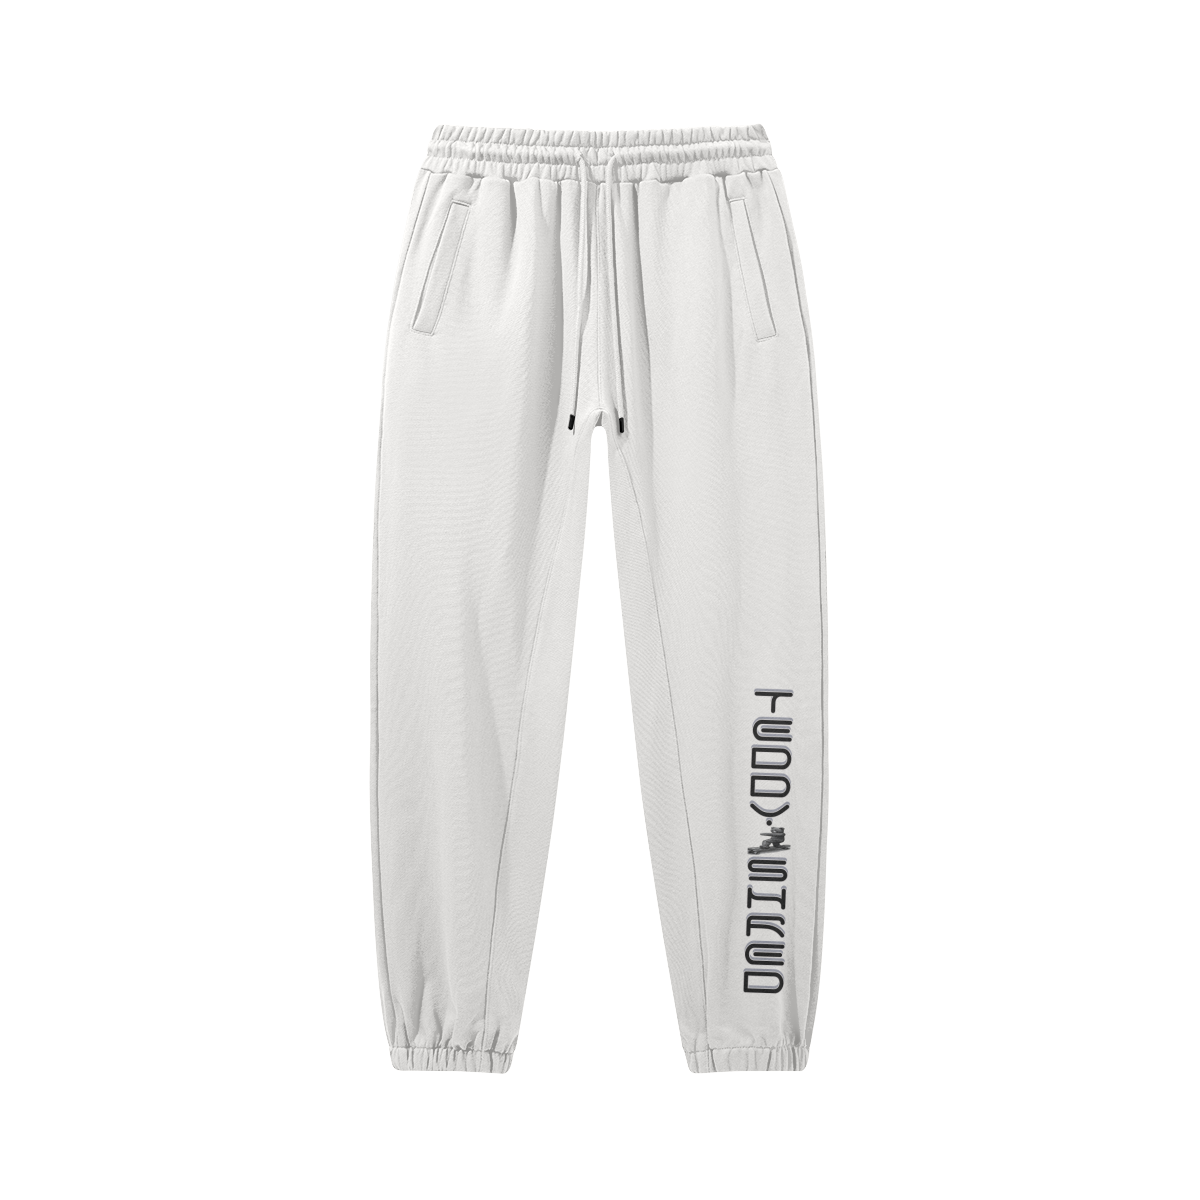 White - Teddy Ride Shred 380GSM Unisex Heavyweight Baggy Sweatpants - unisex sweatpants at TFC&H Co.